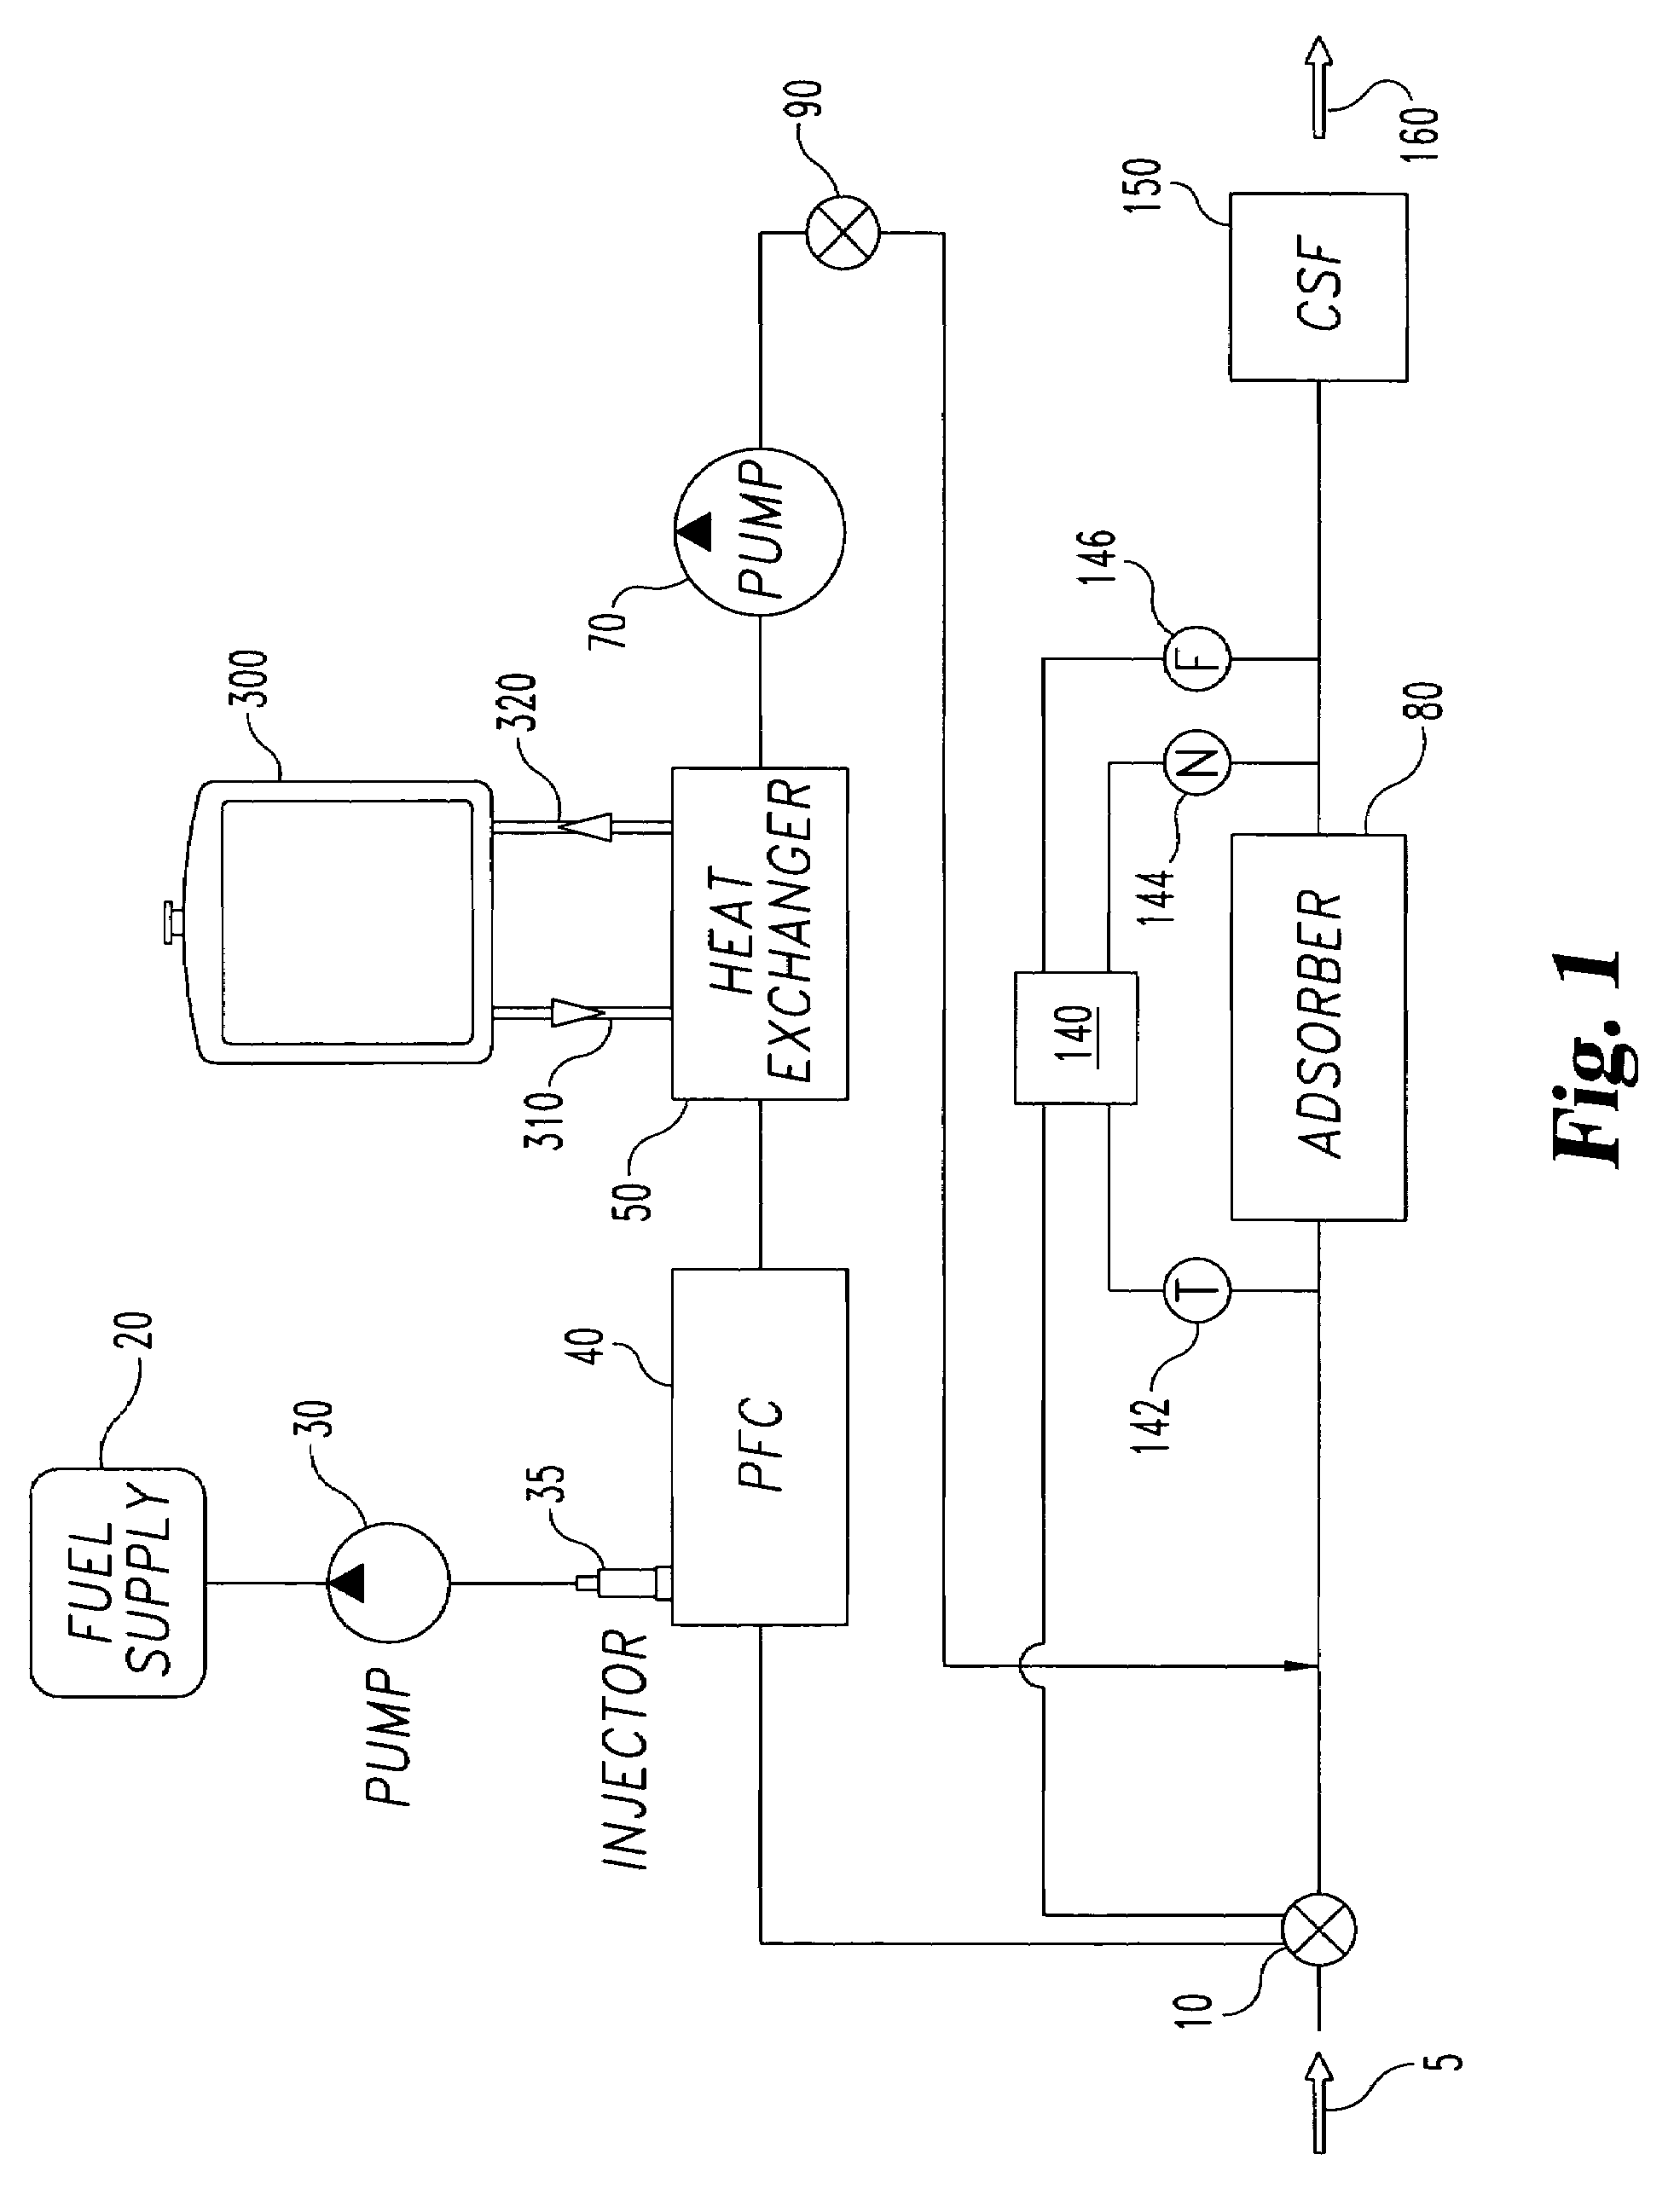 Plasma fuel converter NOx adsorber system for exhaust aftertreatment